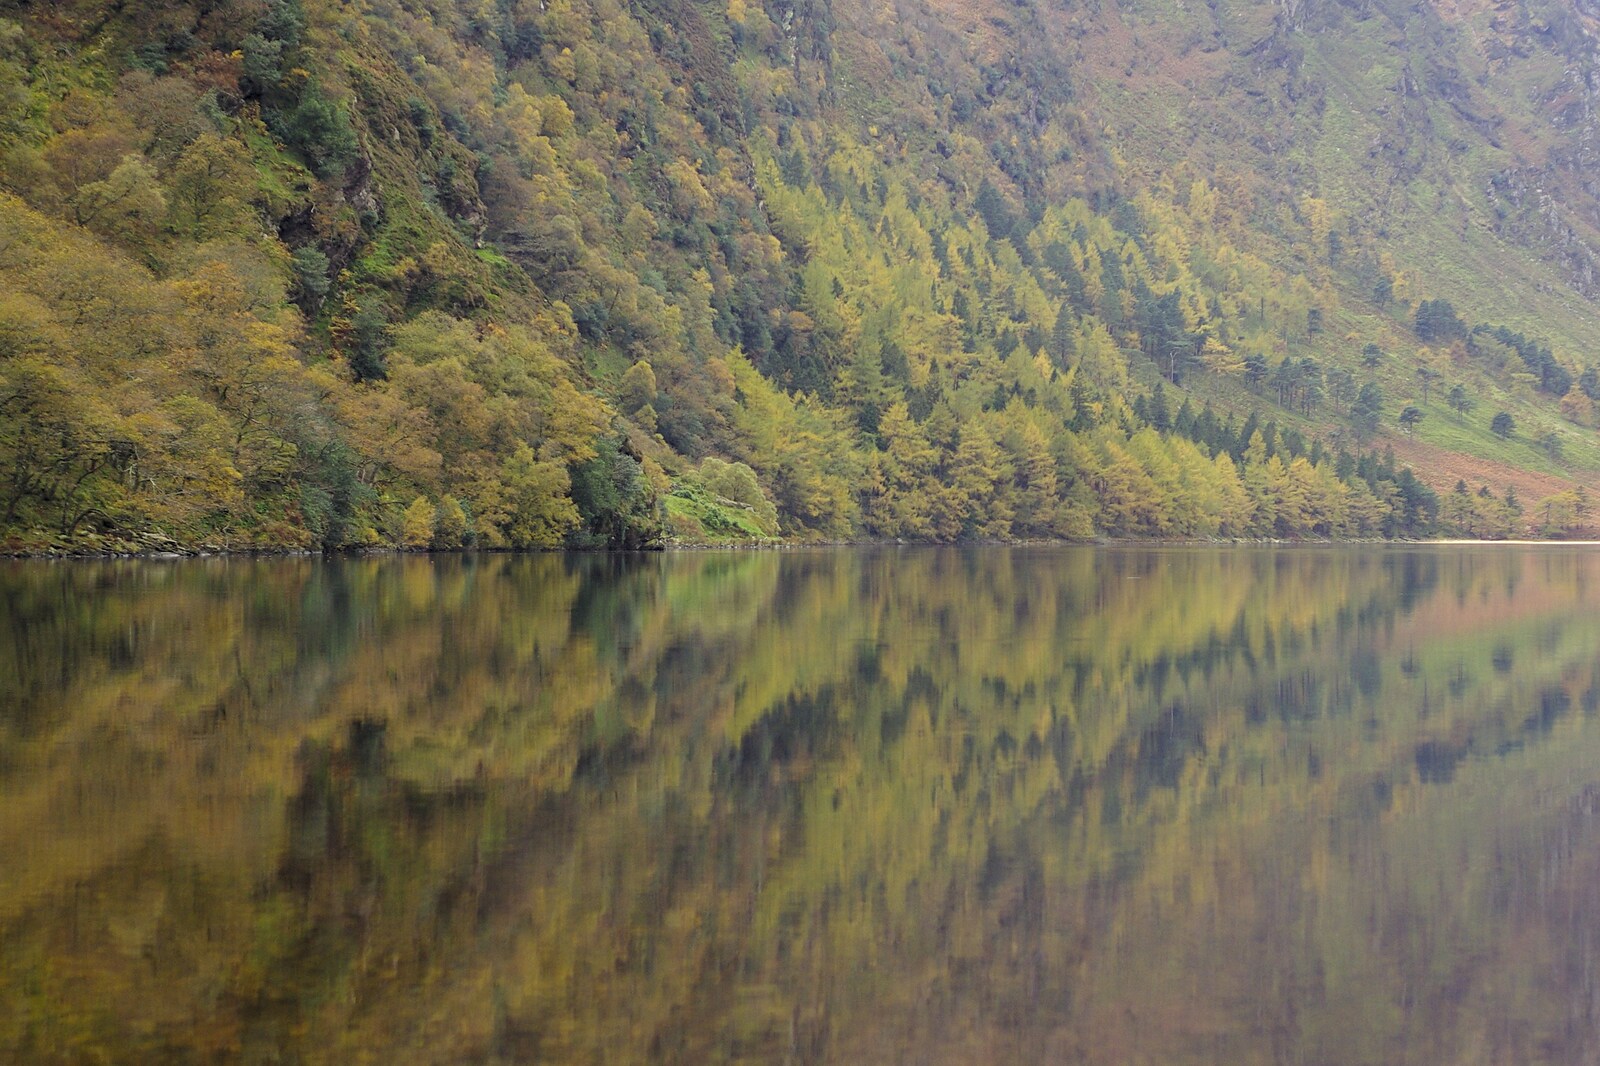 Autumn reflections in the water of Glendalough from Reflections: A Day at Glendalough, County Wicklow, Ireland - 3rd November 2007